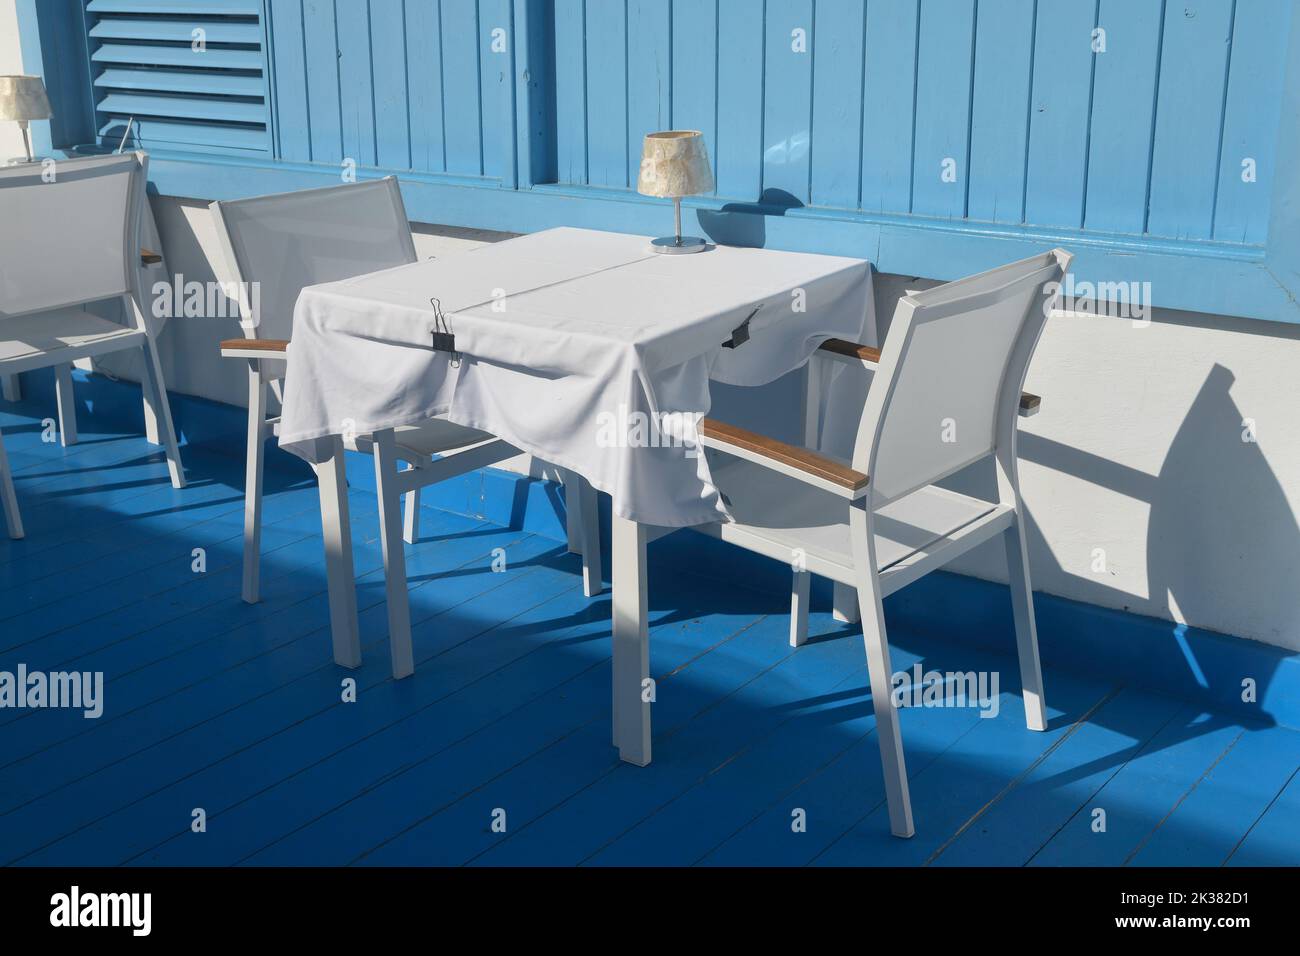 White table and chairs with blue wooden floor and wall as backdrop. Outdoors in sunshine with shadows. Restaurant, no people. Stock Photo